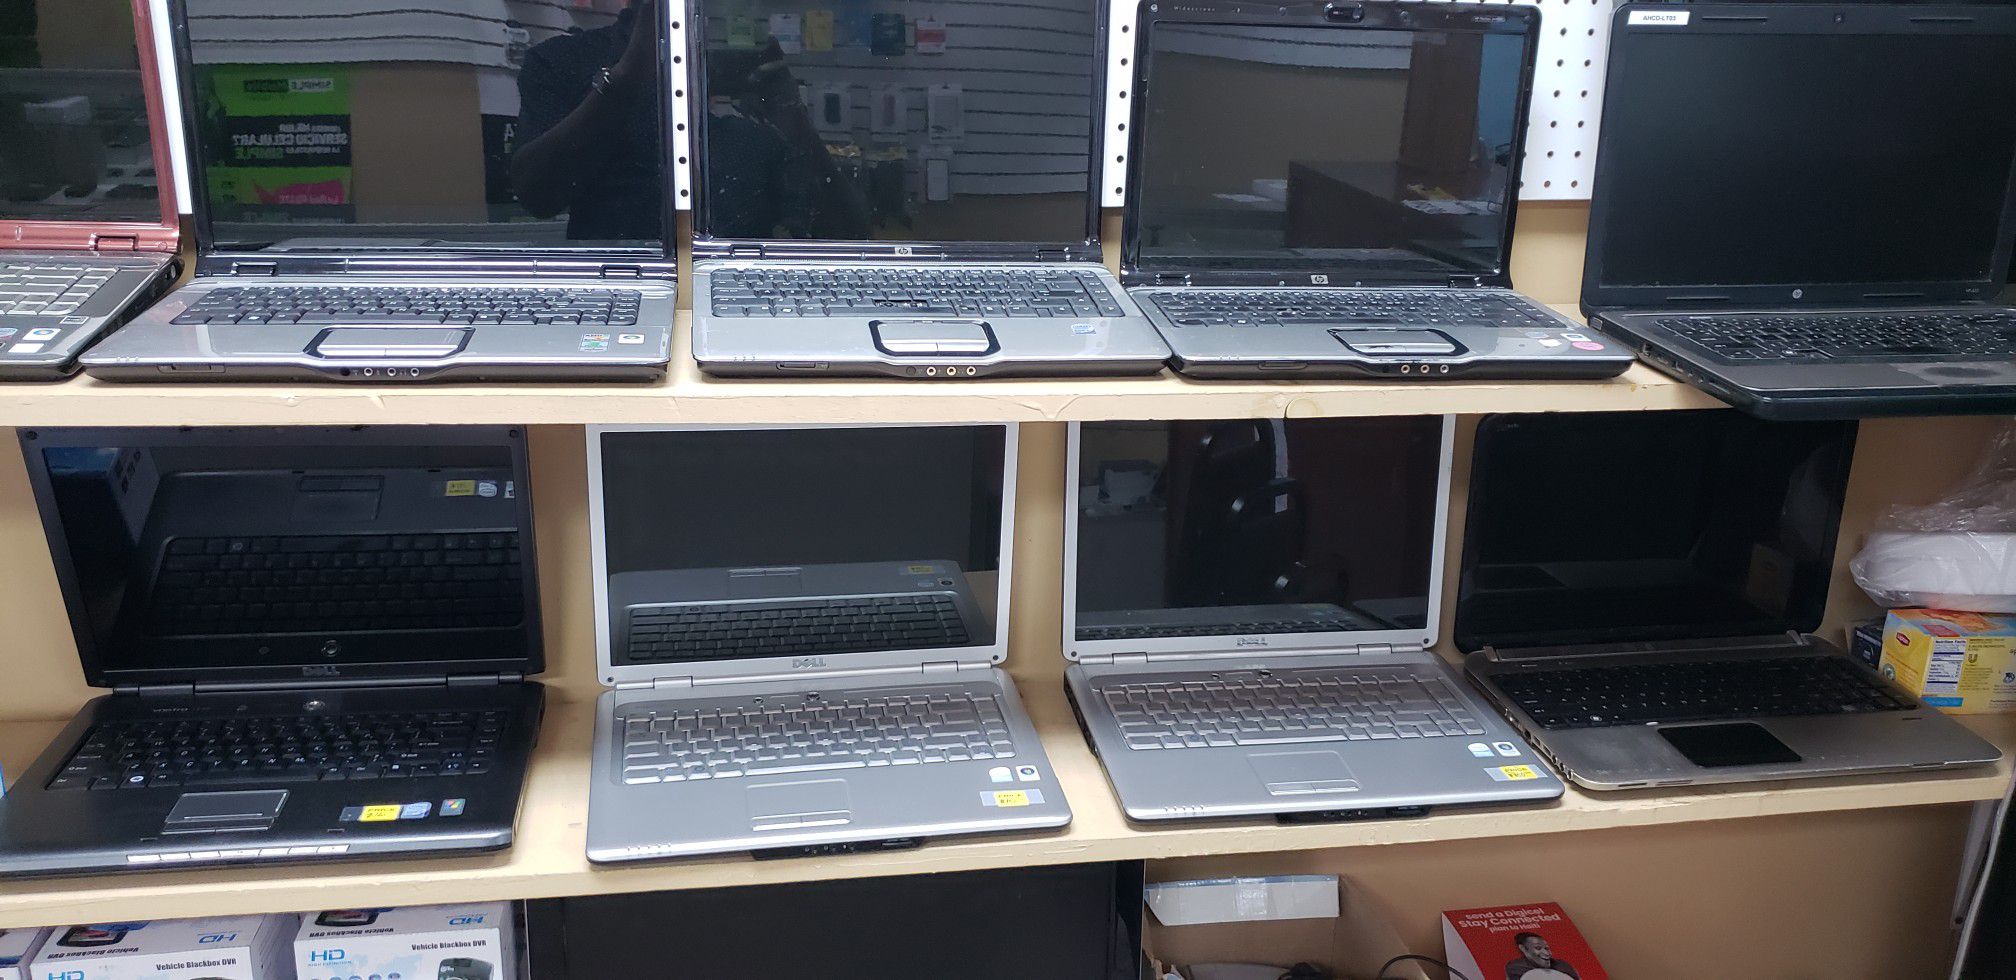 Laptops, HP, Dell and more